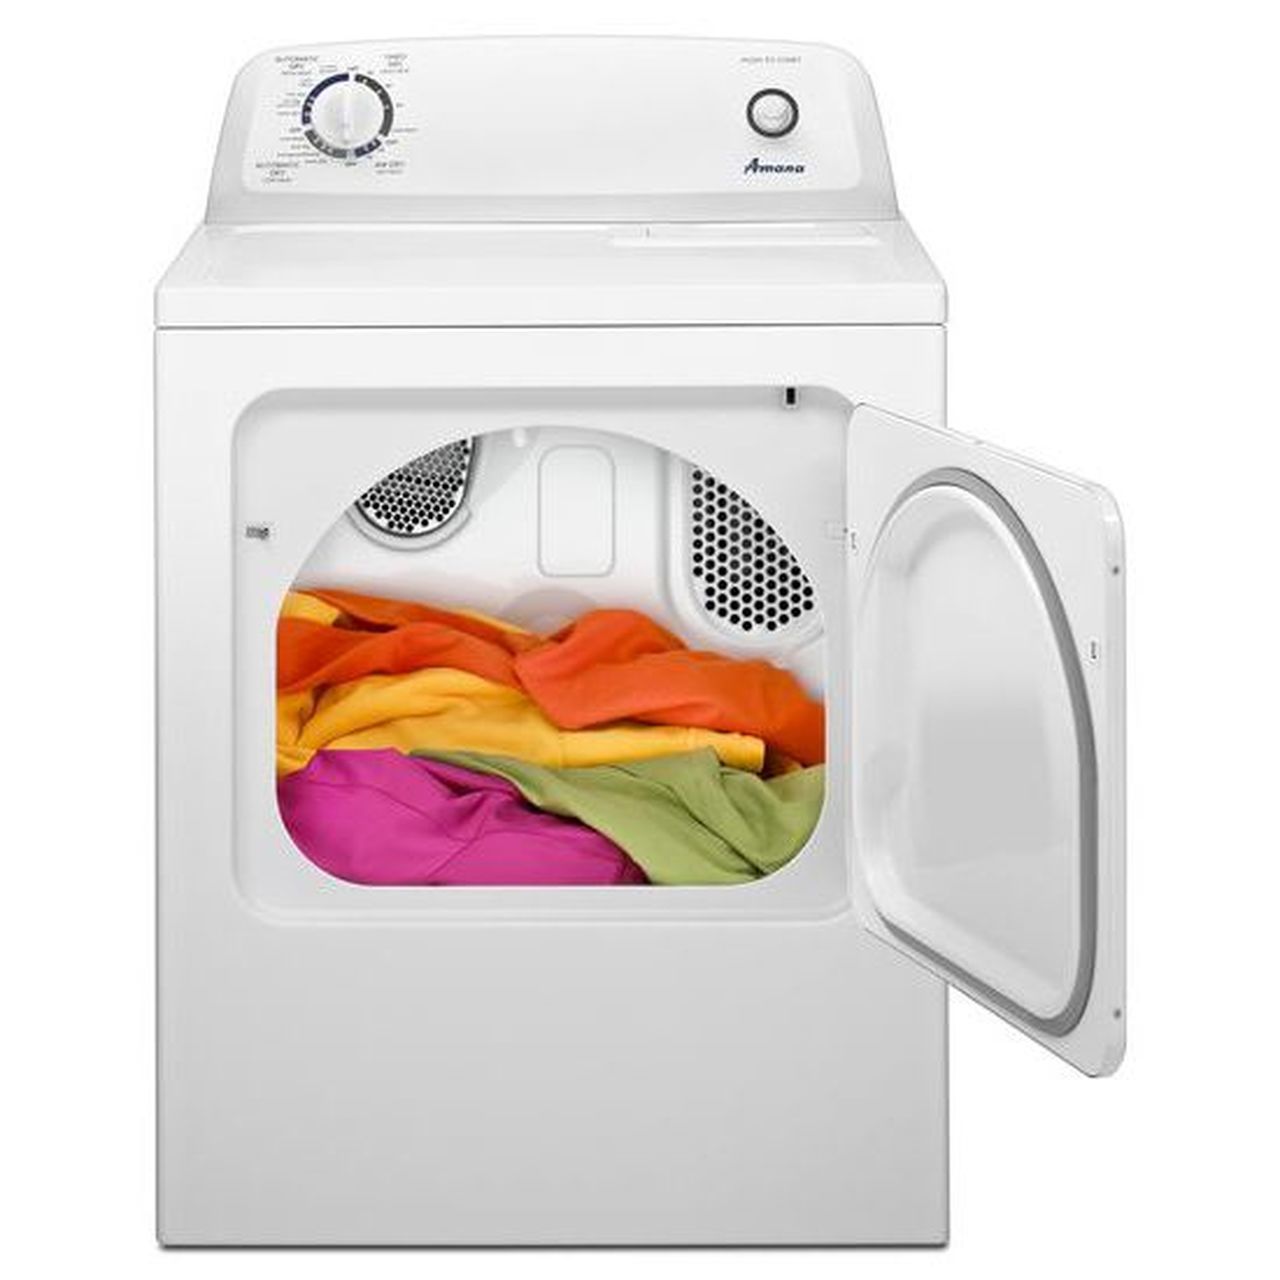 An electric clothes dryer has a resistance of 12 ohms